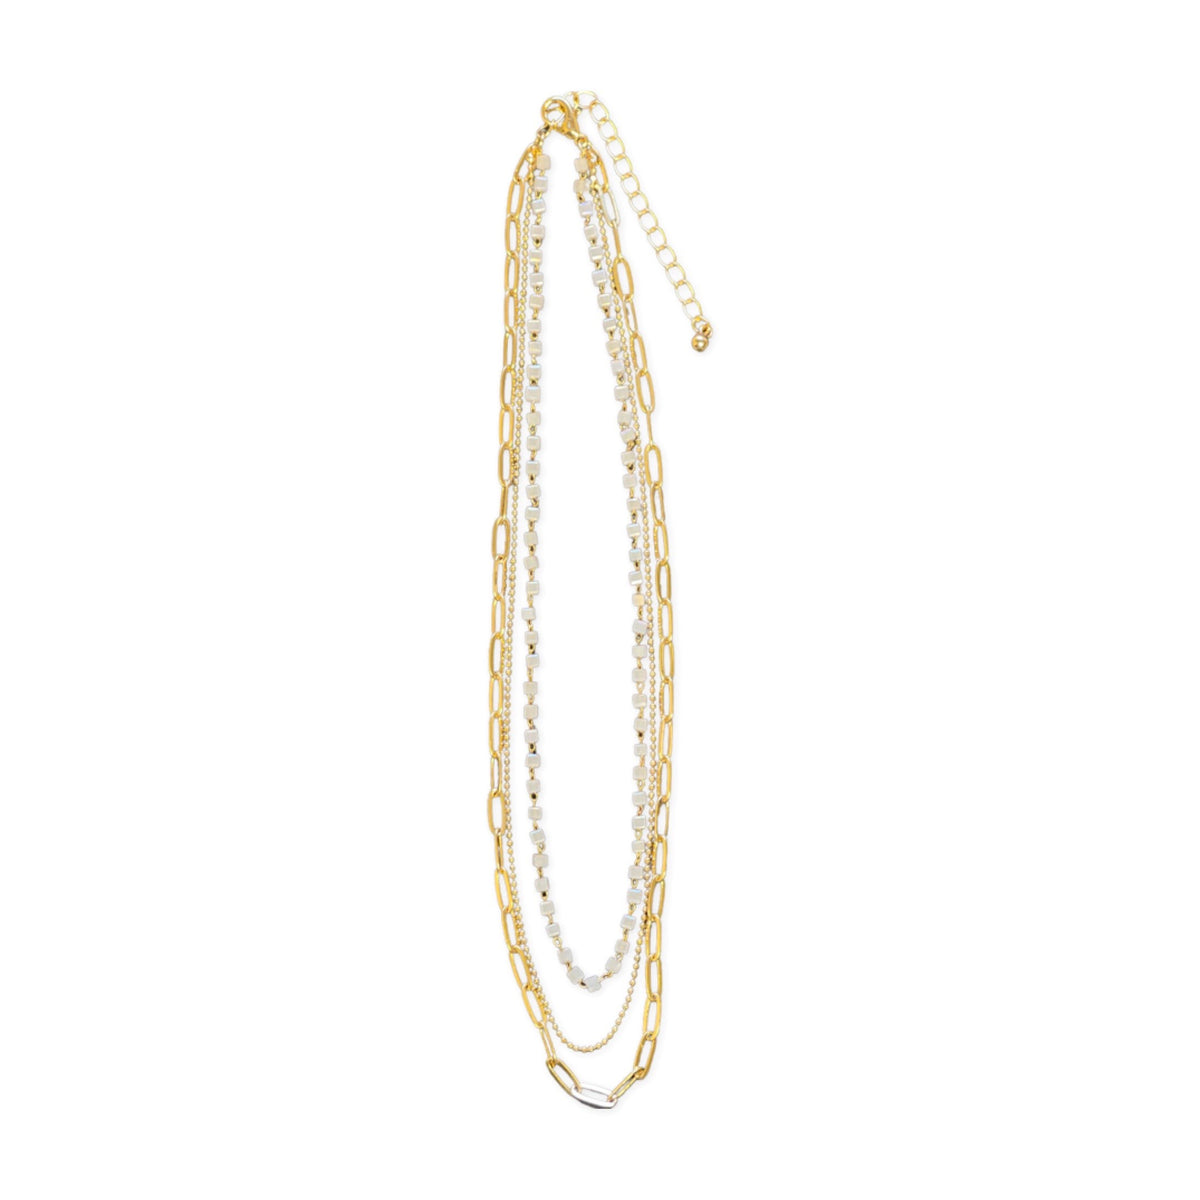 Three Strand Square Bead - Link - Ball Chain Necklace